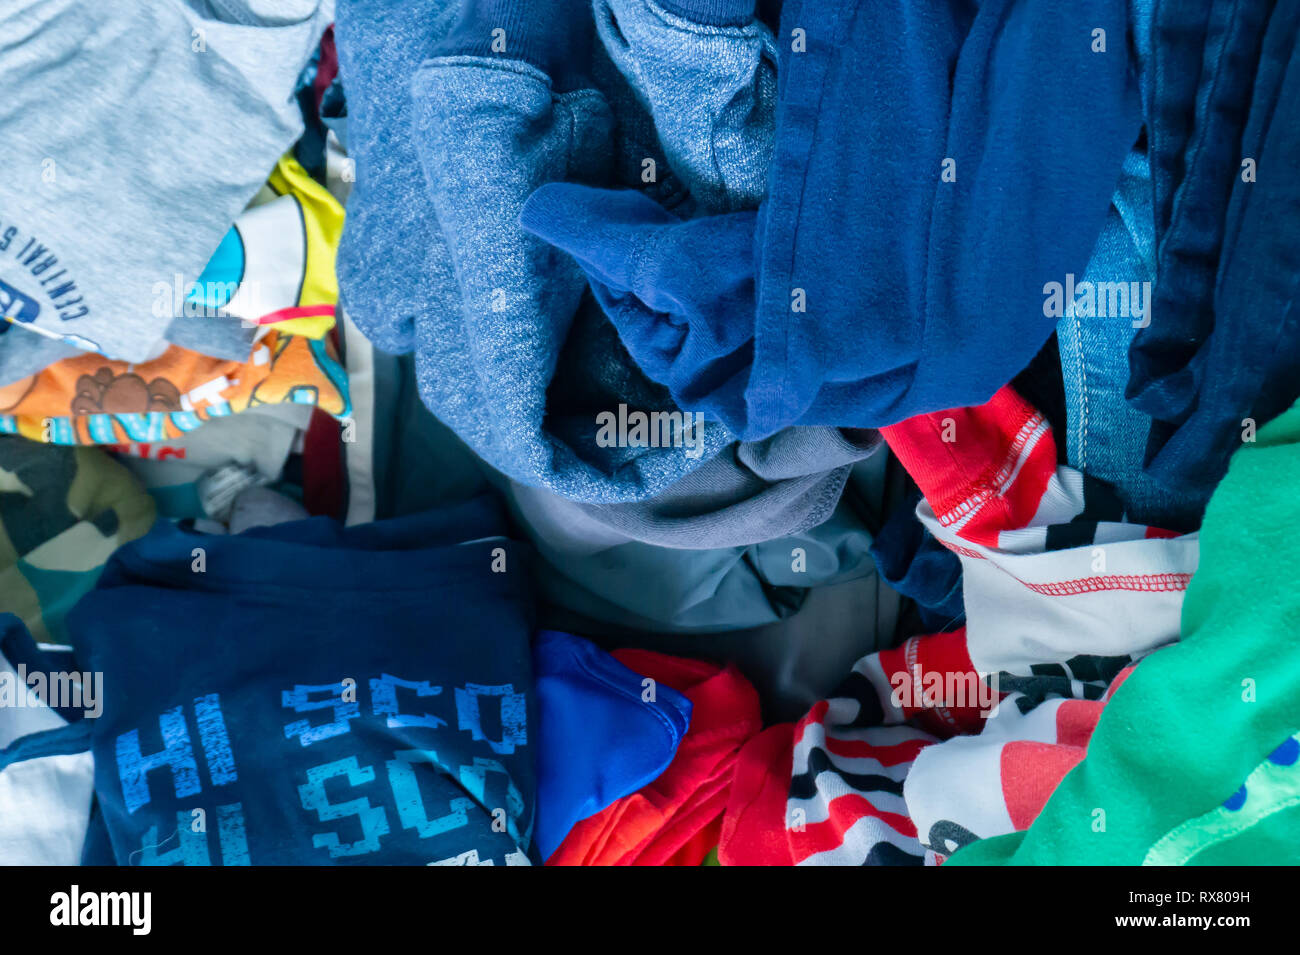 Pile Different Used Clothes On Sale Stock Photo 1517393651